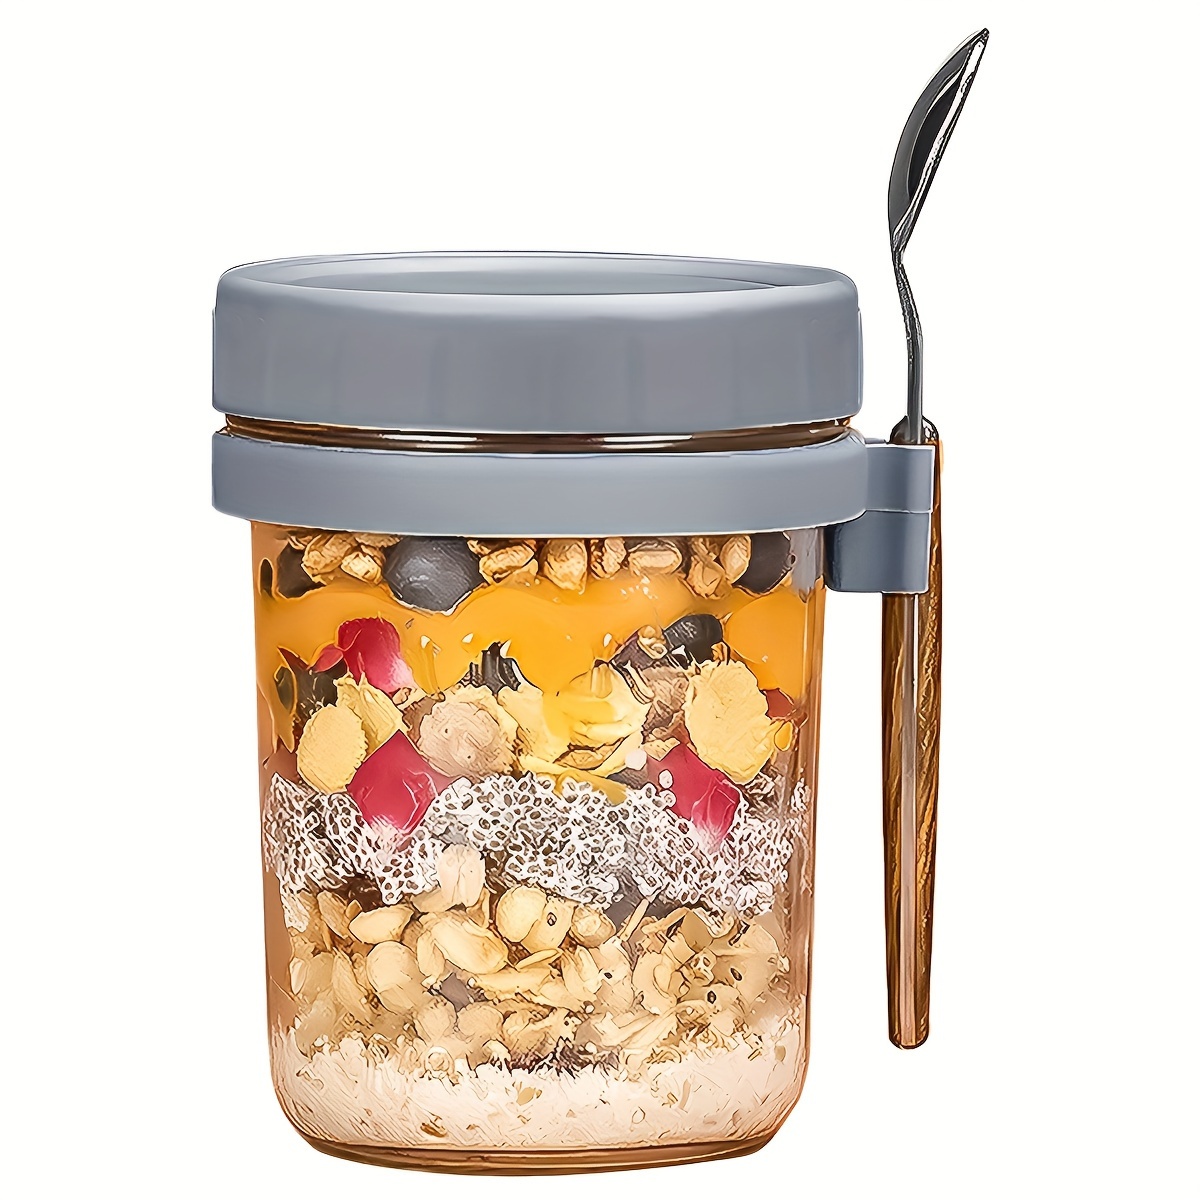 600ml Overnight Oats Containers with Lids durable Oats Jars with  Measurement Marks Reusable on the Go